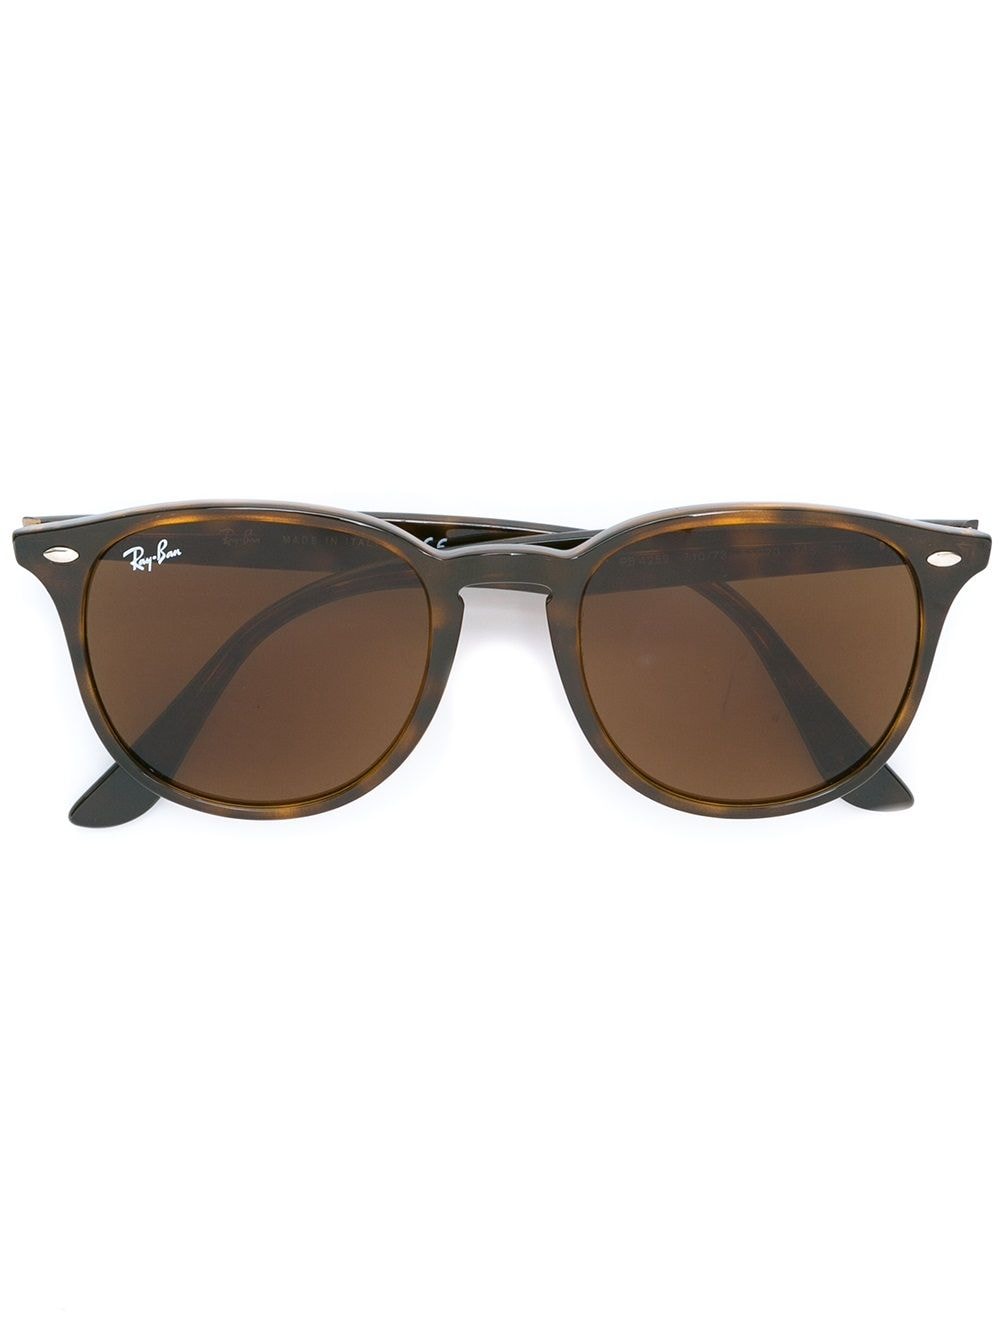 Ray-Ban oval frame sunglasses - Brown von Ray-Ban